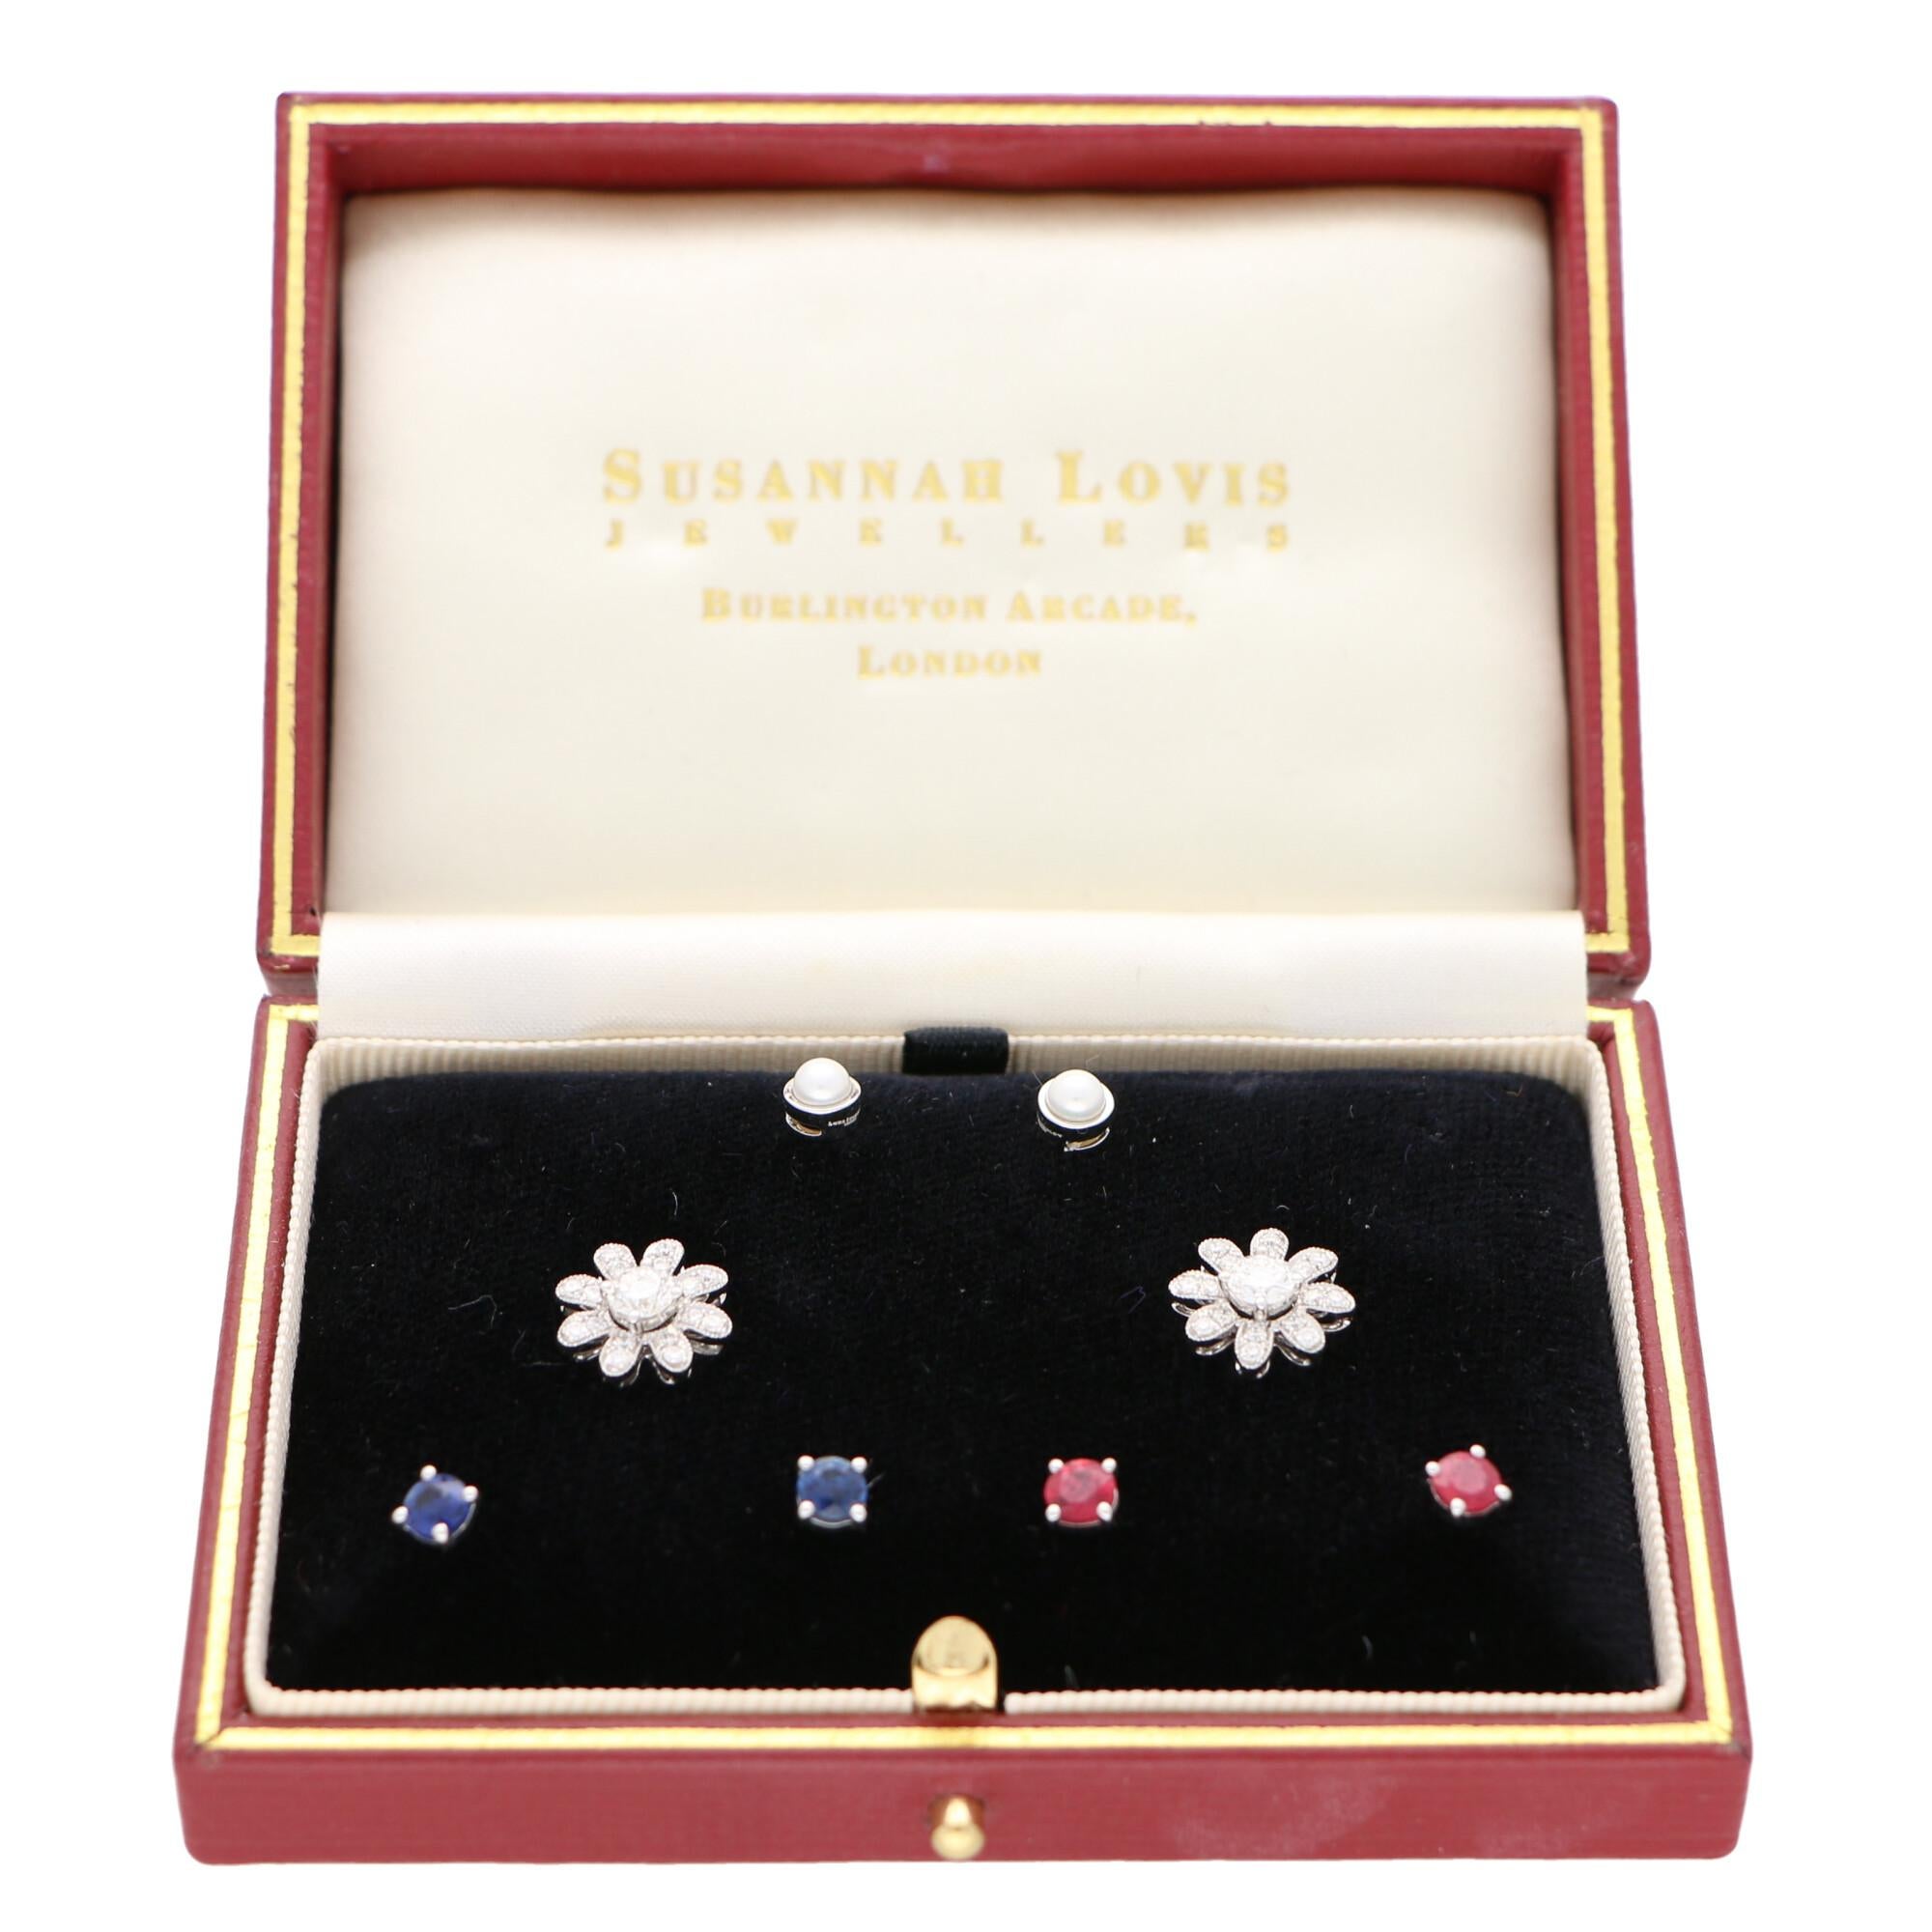 Interchangeable Ruby, Sapphire, Diamond and Pearl Stud Floral Earrings in Gold For Sale 4